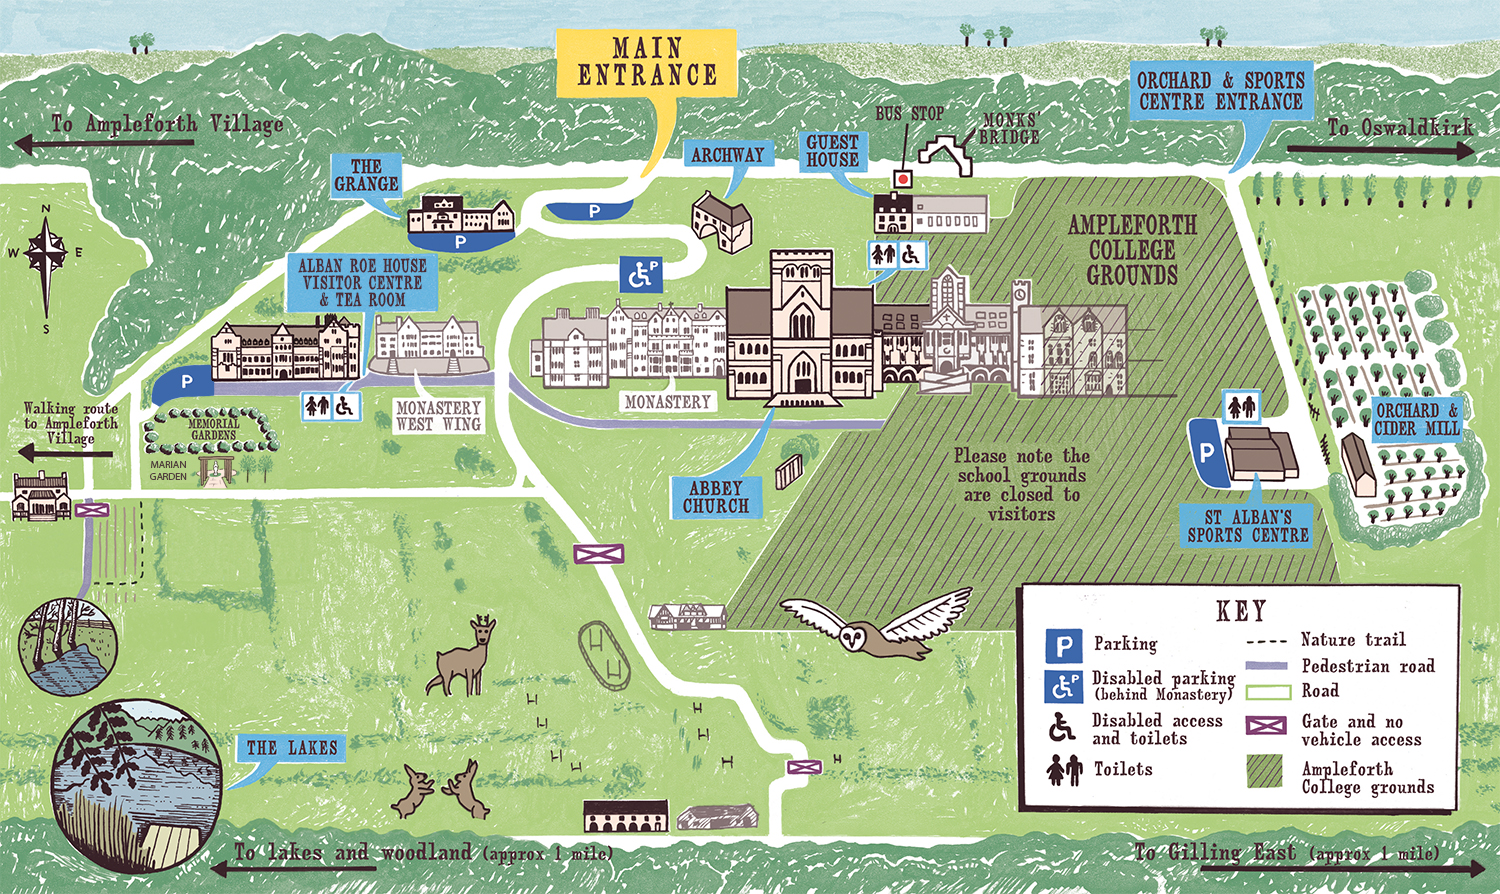 Illustrated map for visitors showing locations of key points to visit